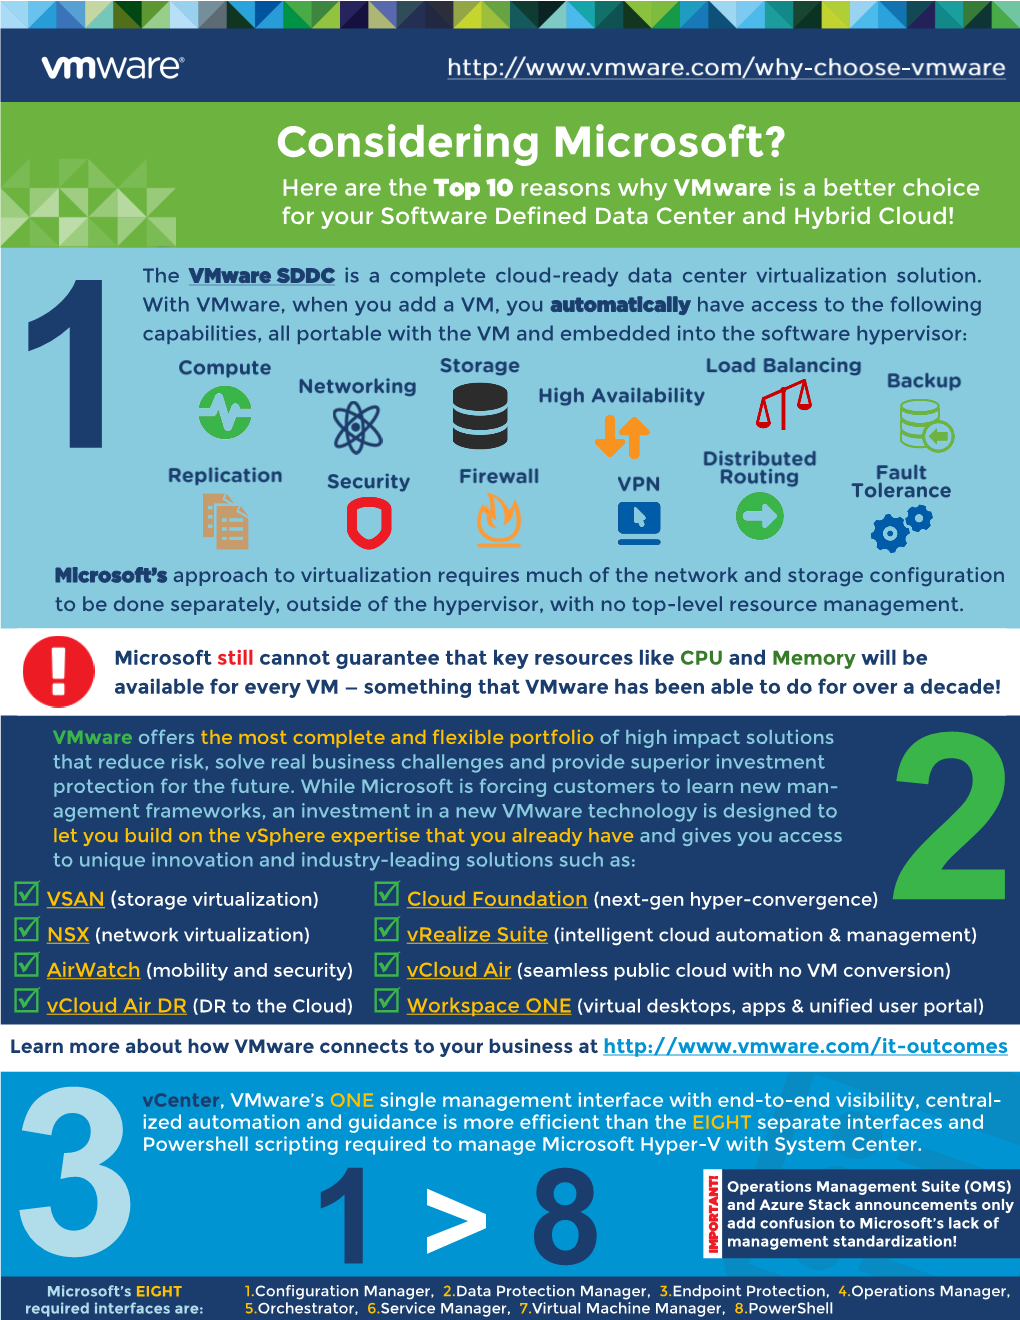 Top 10 Reasons Why Vmware Is Better Than Microsoft for SDDC And